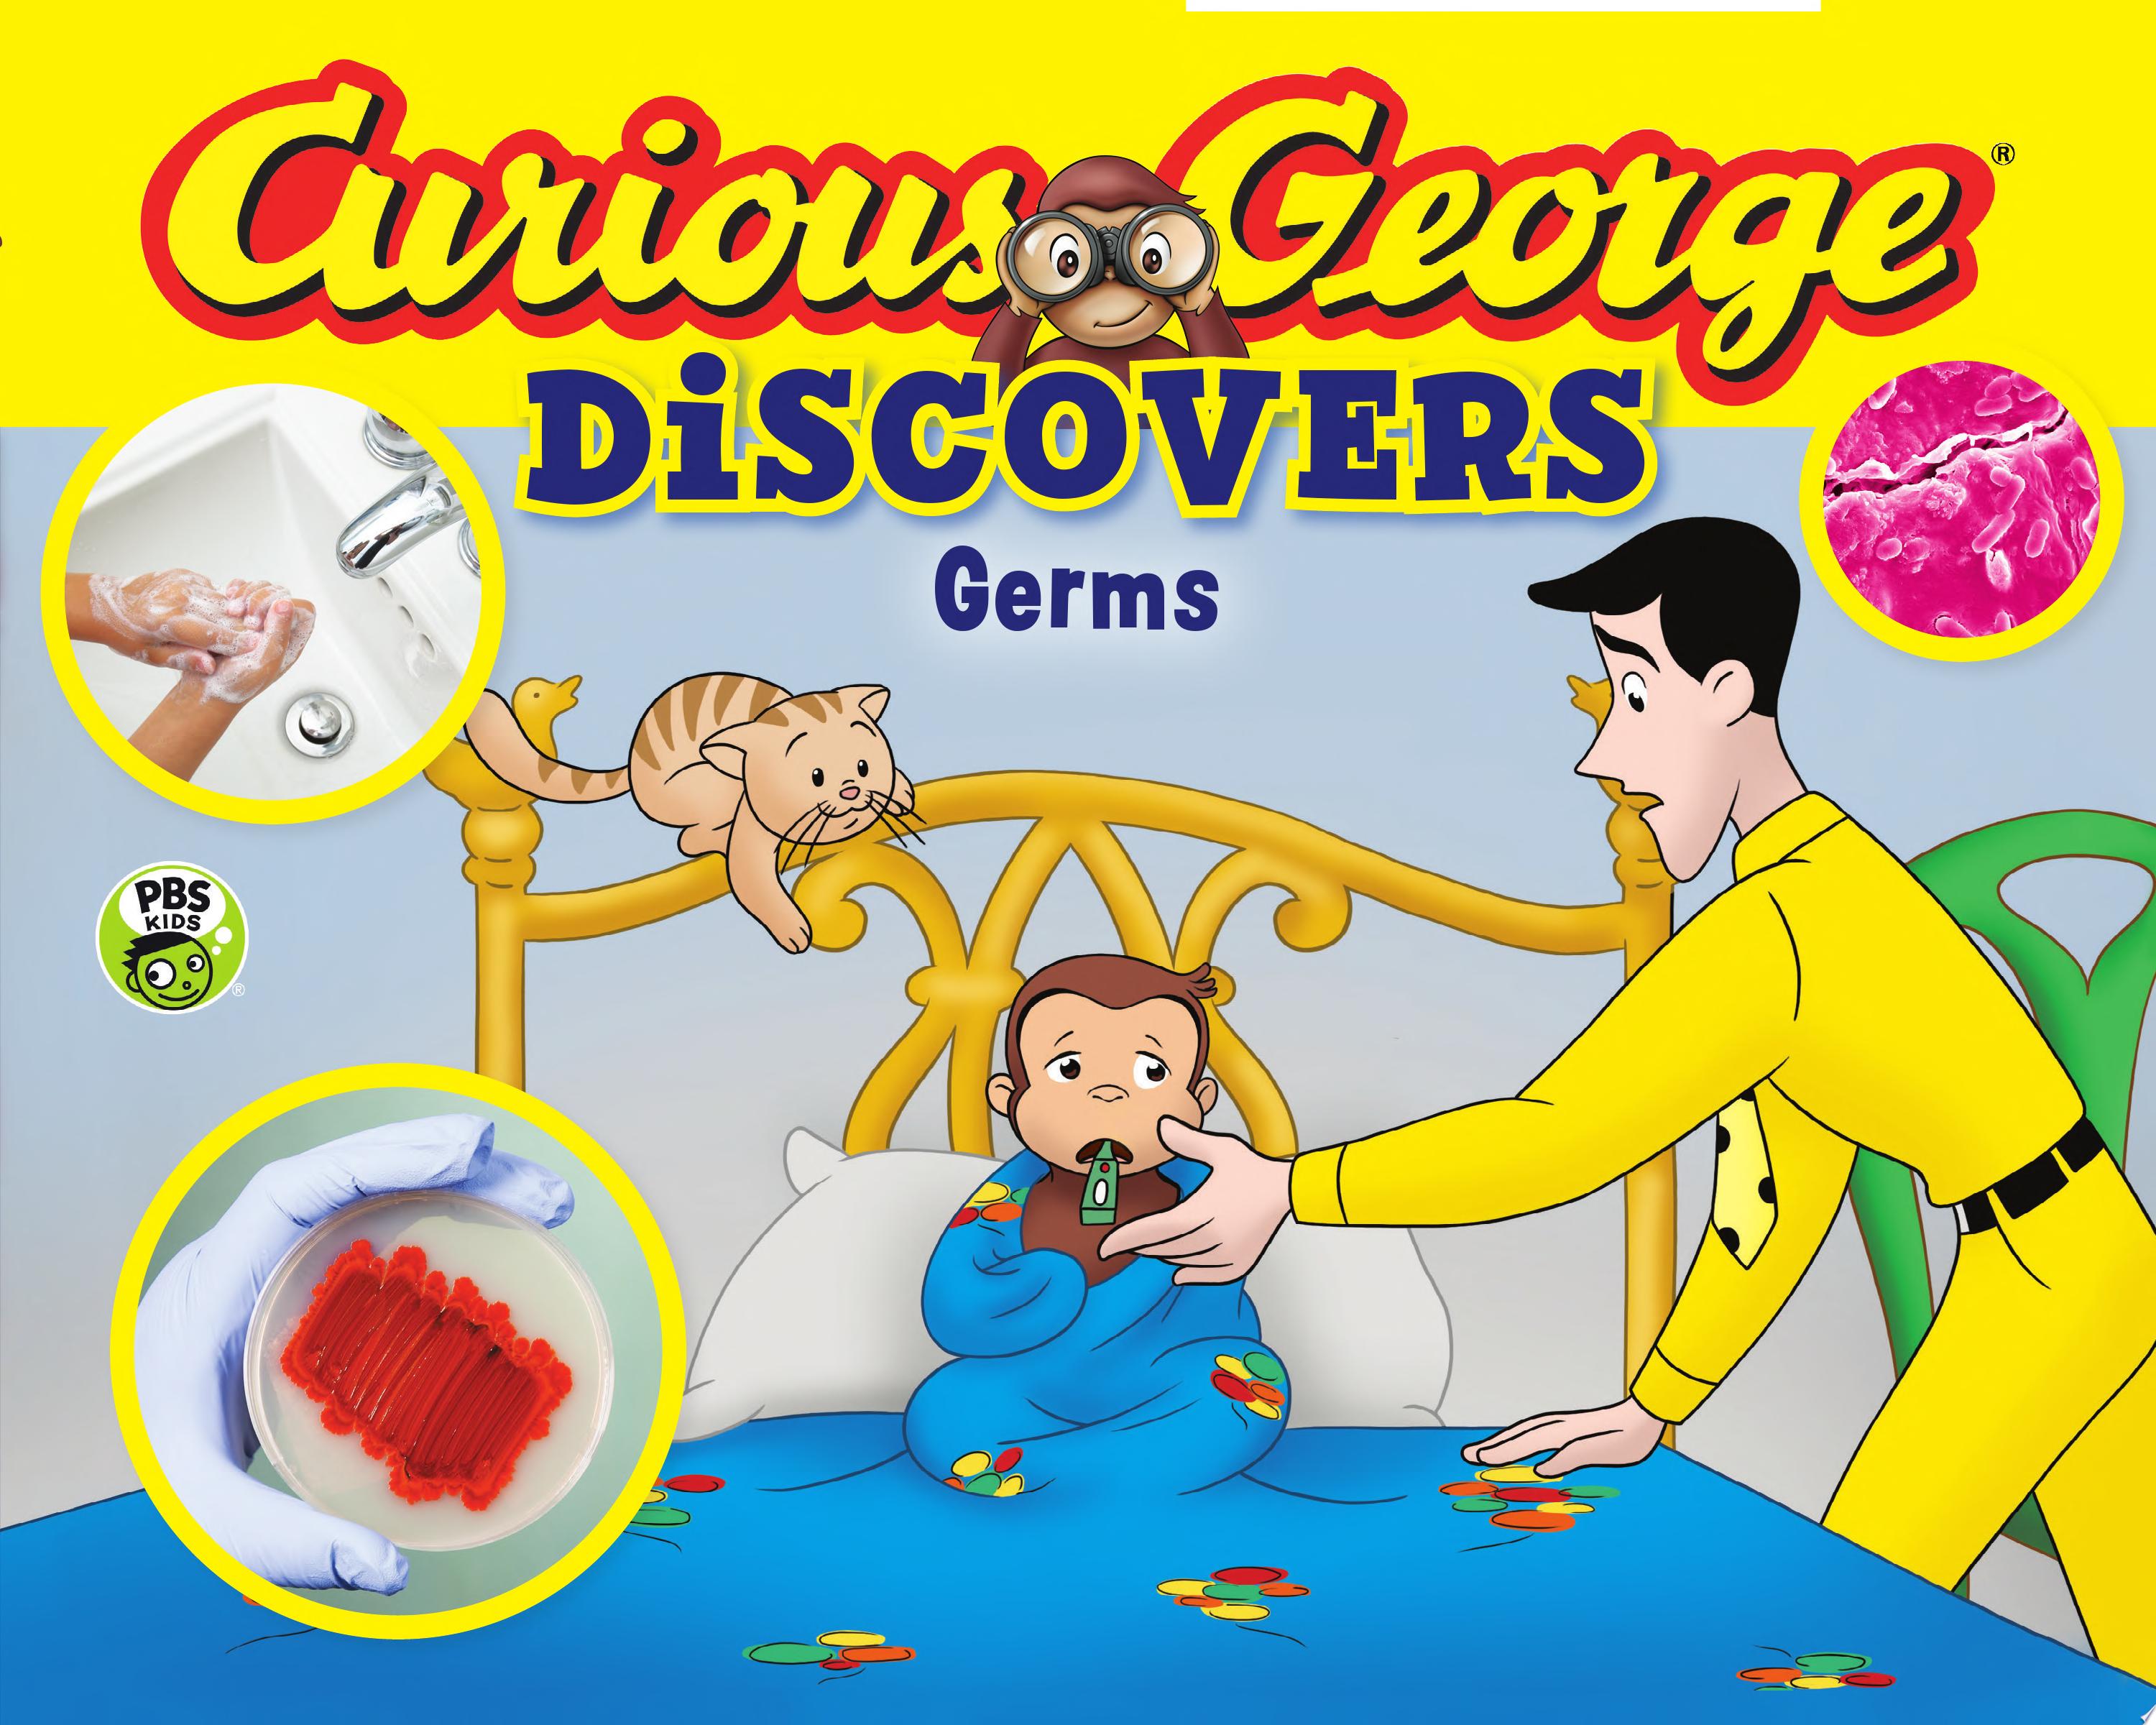 Image for "Curious George Discovers Germs"